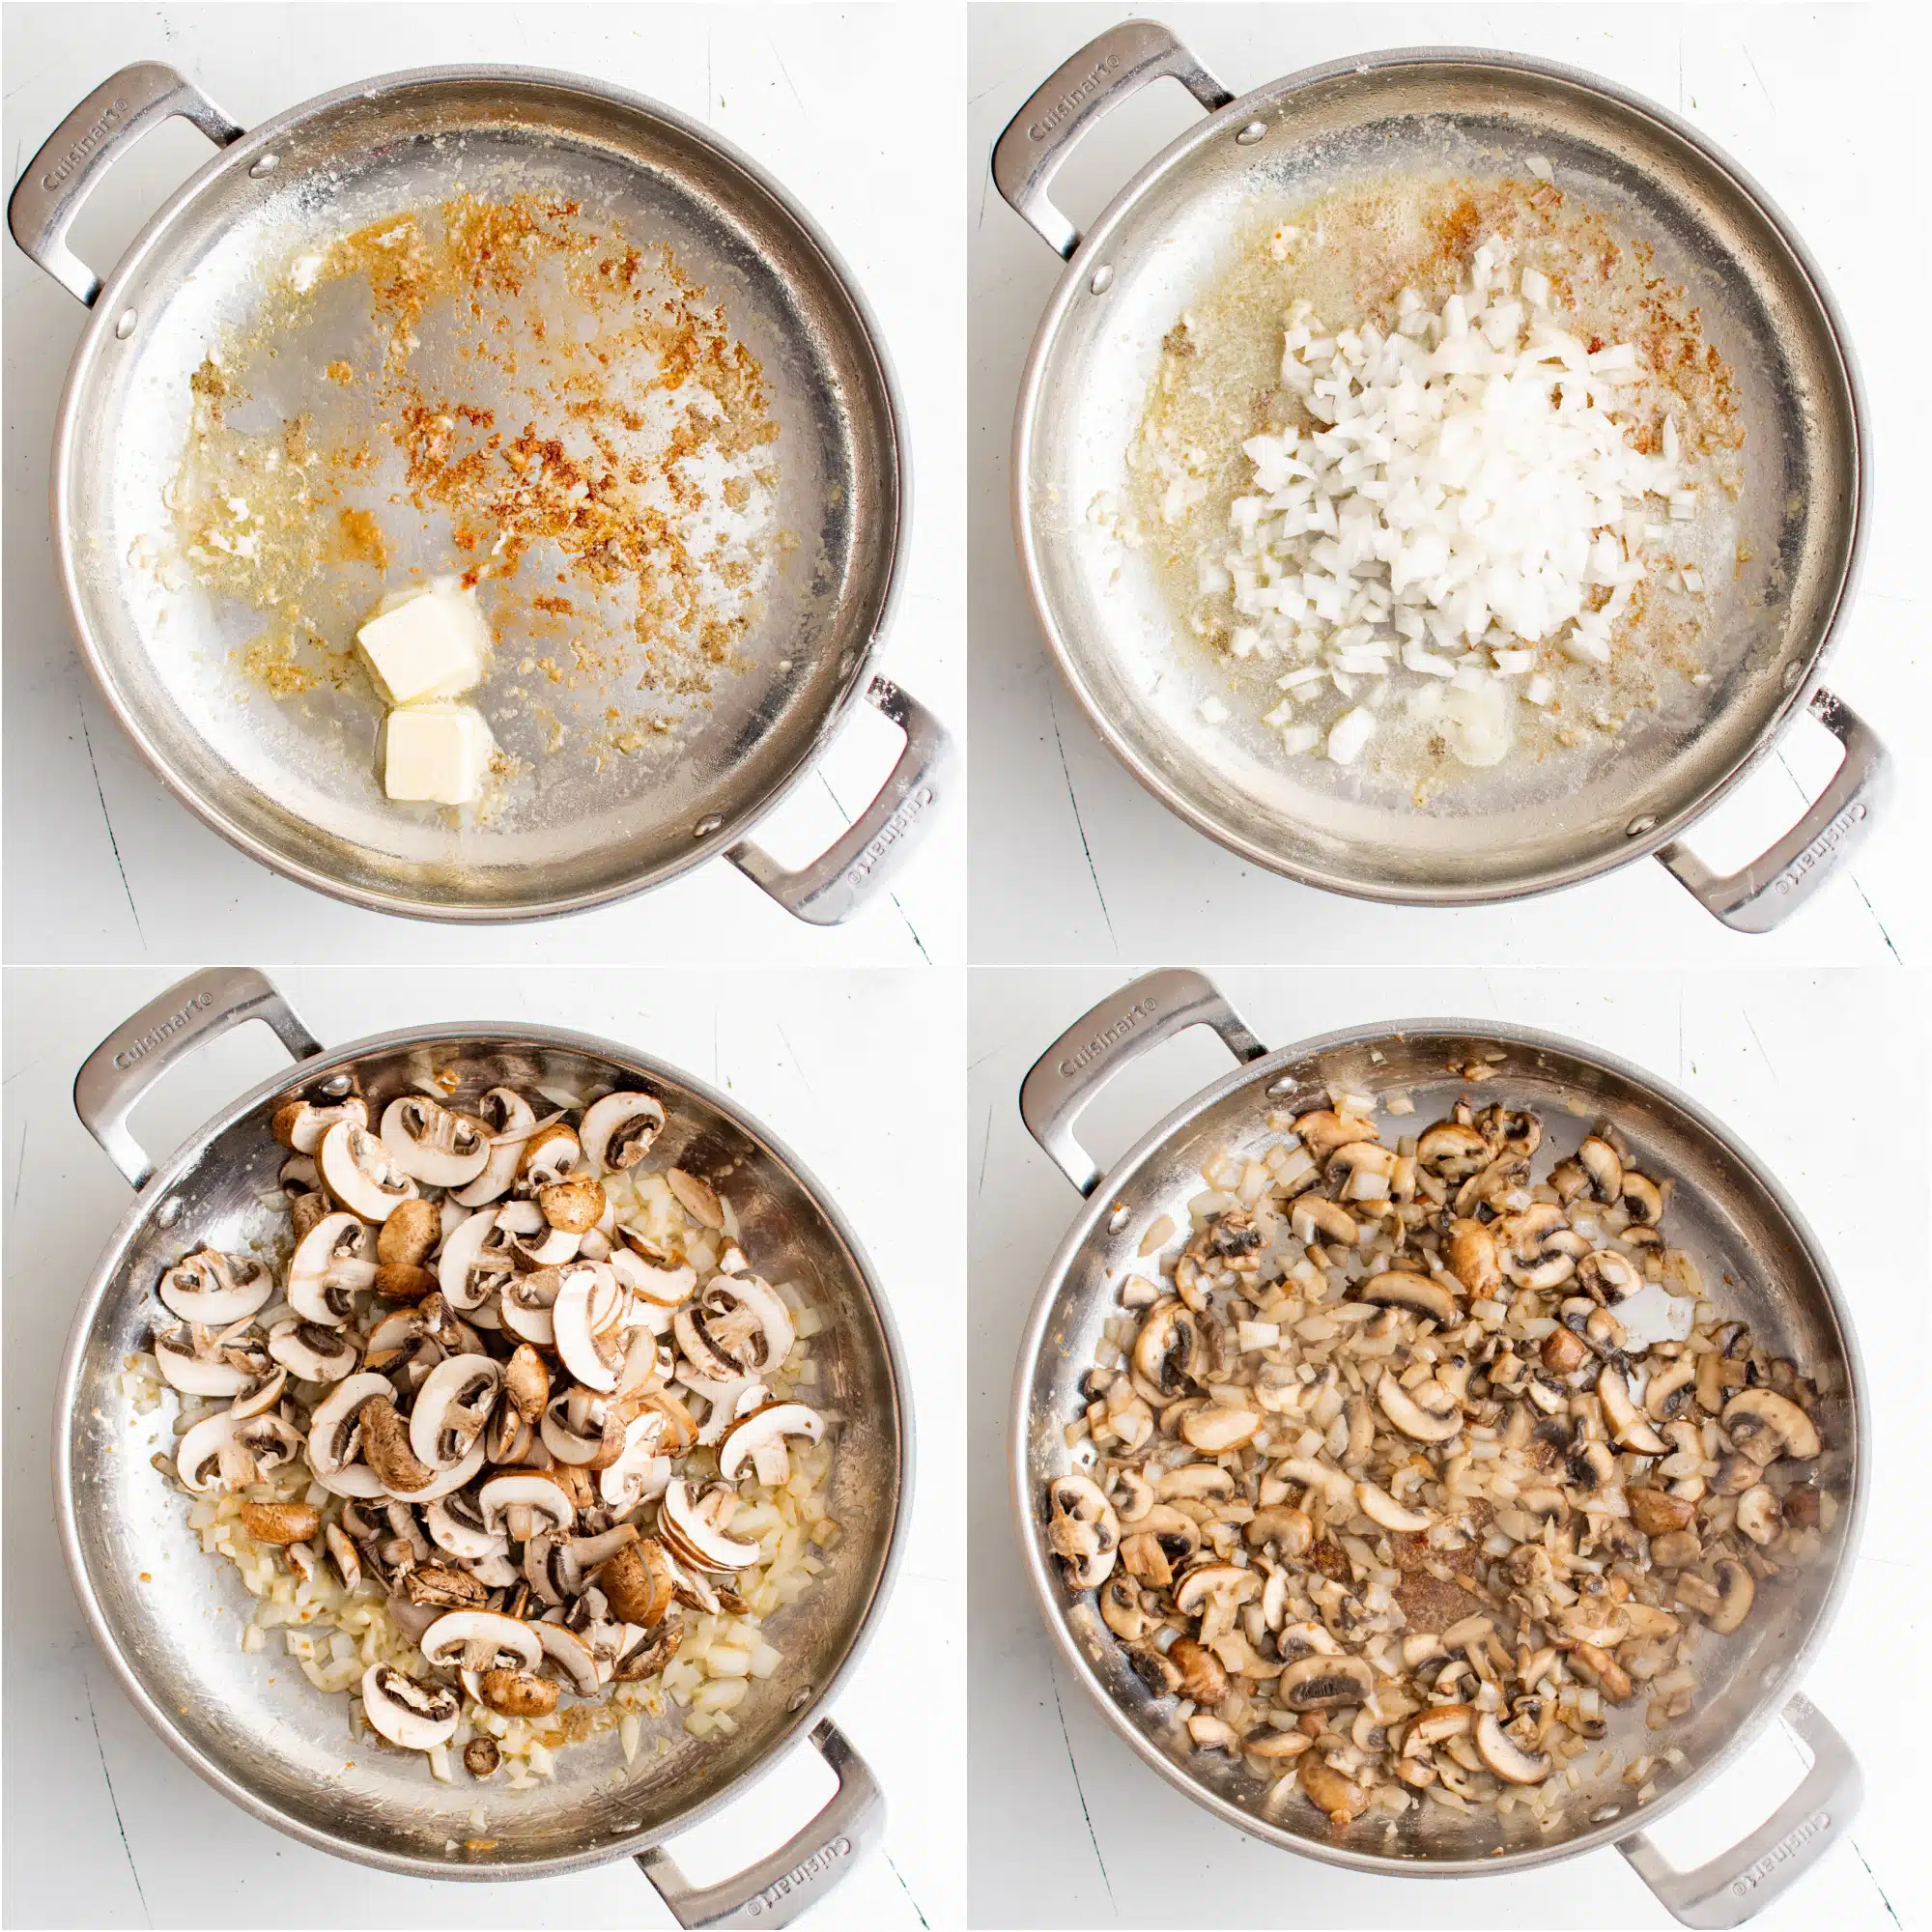 Collage of four images; the first image shows butter melting in a large stainless steel pan; image two shows diced onion added to a stainless steel pan with melted butter; image four shows sliced mushrooms added to a stainless steel pan with softened onions; image four shows a stainless steel plan filled with cooked onions and mushrooms.